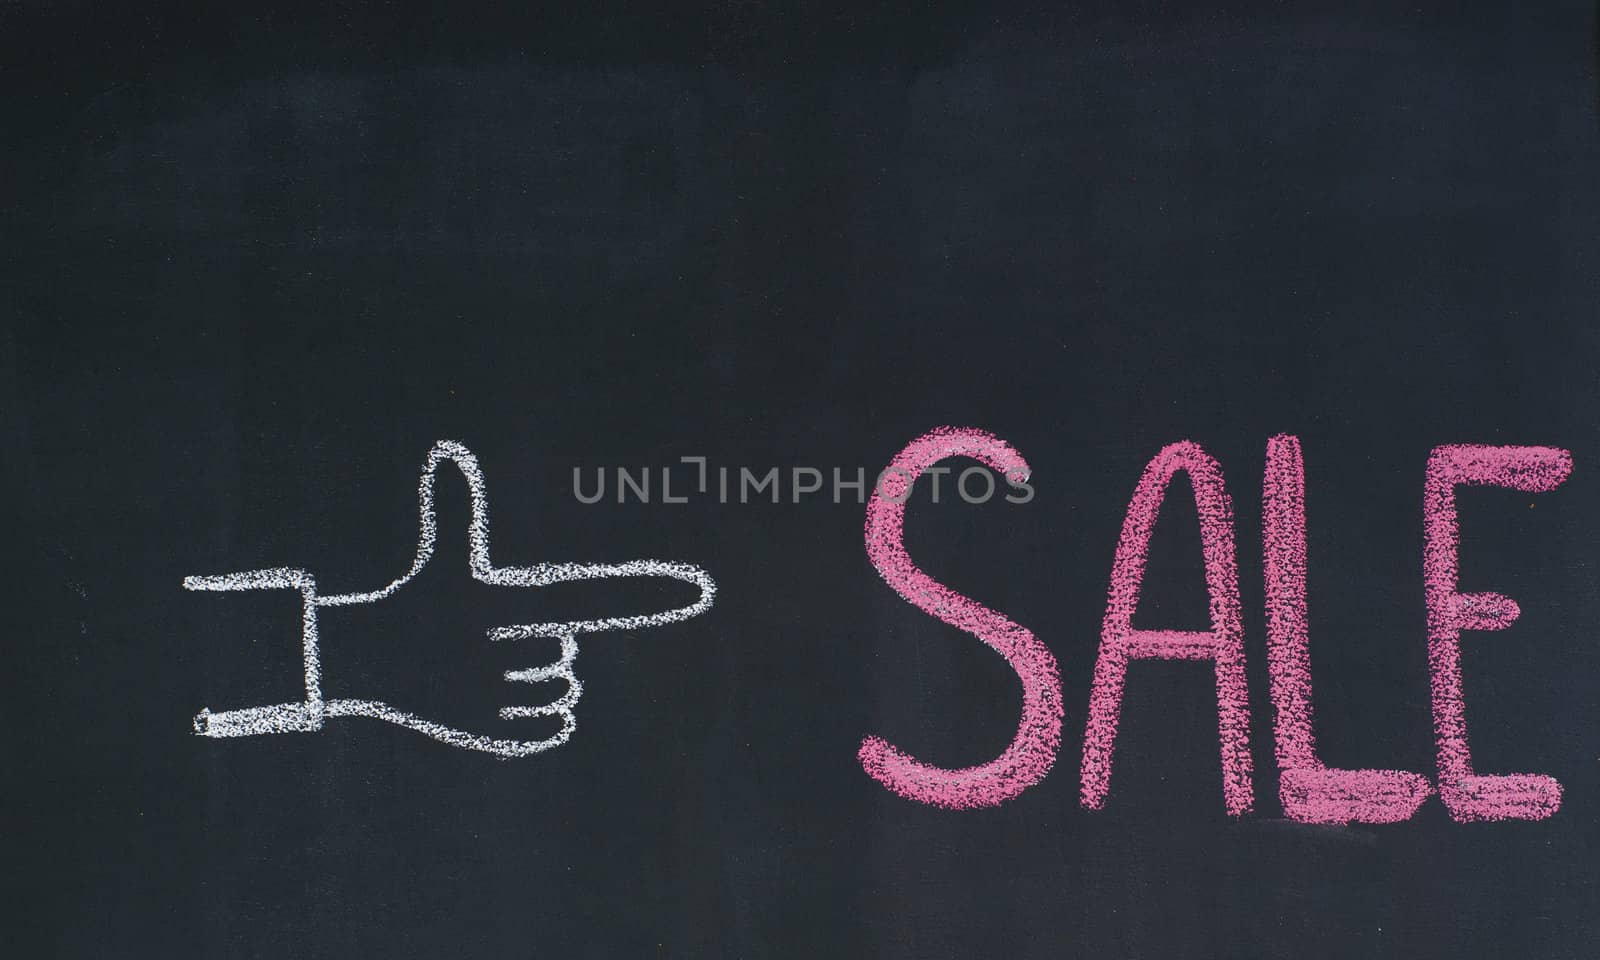 Hand pointing to the word Sale, written on a blackboard